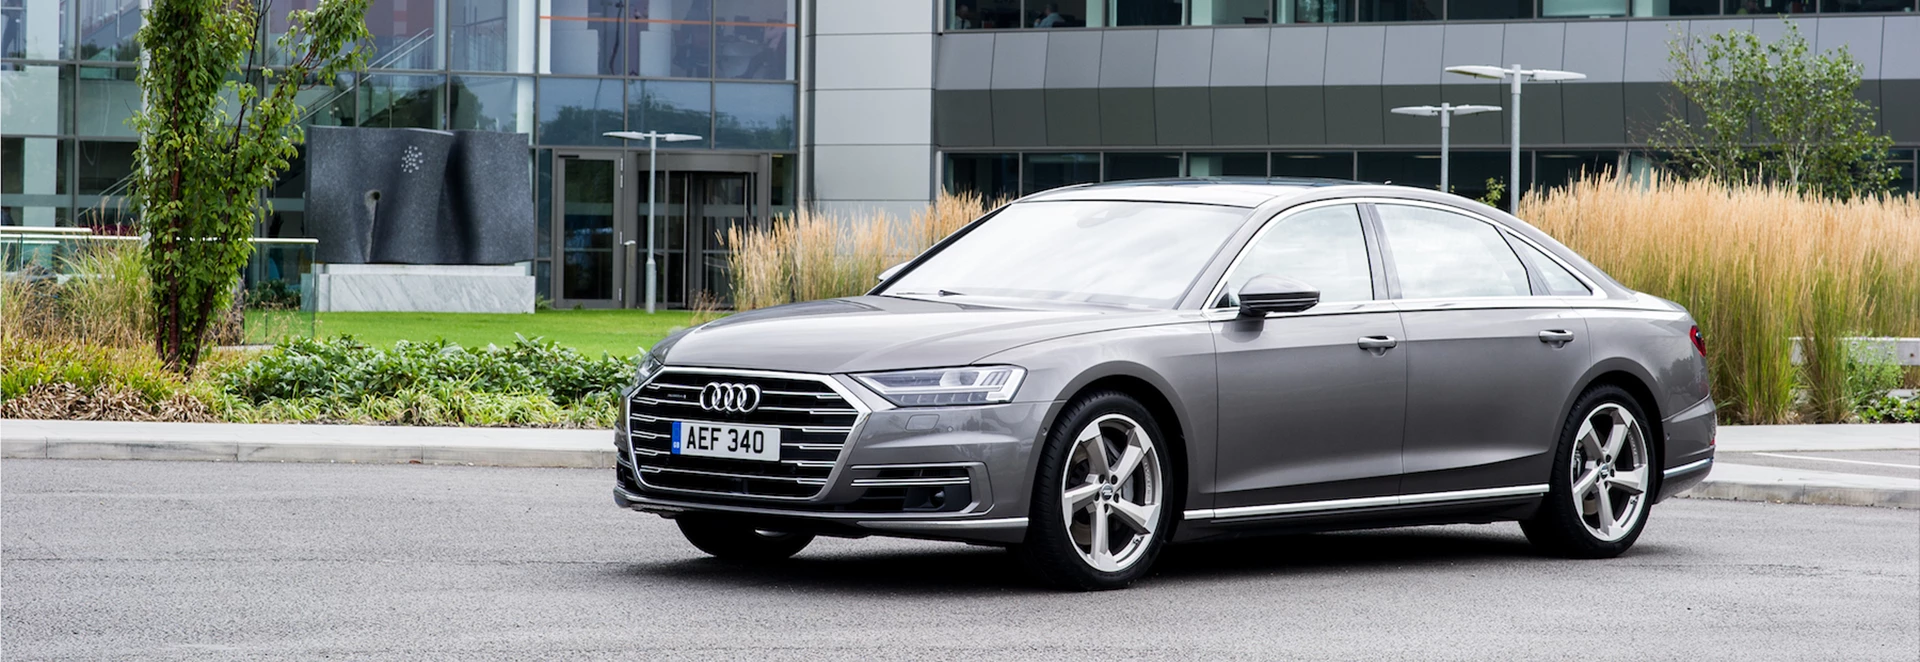 New Audi A8 priced from £69,100 